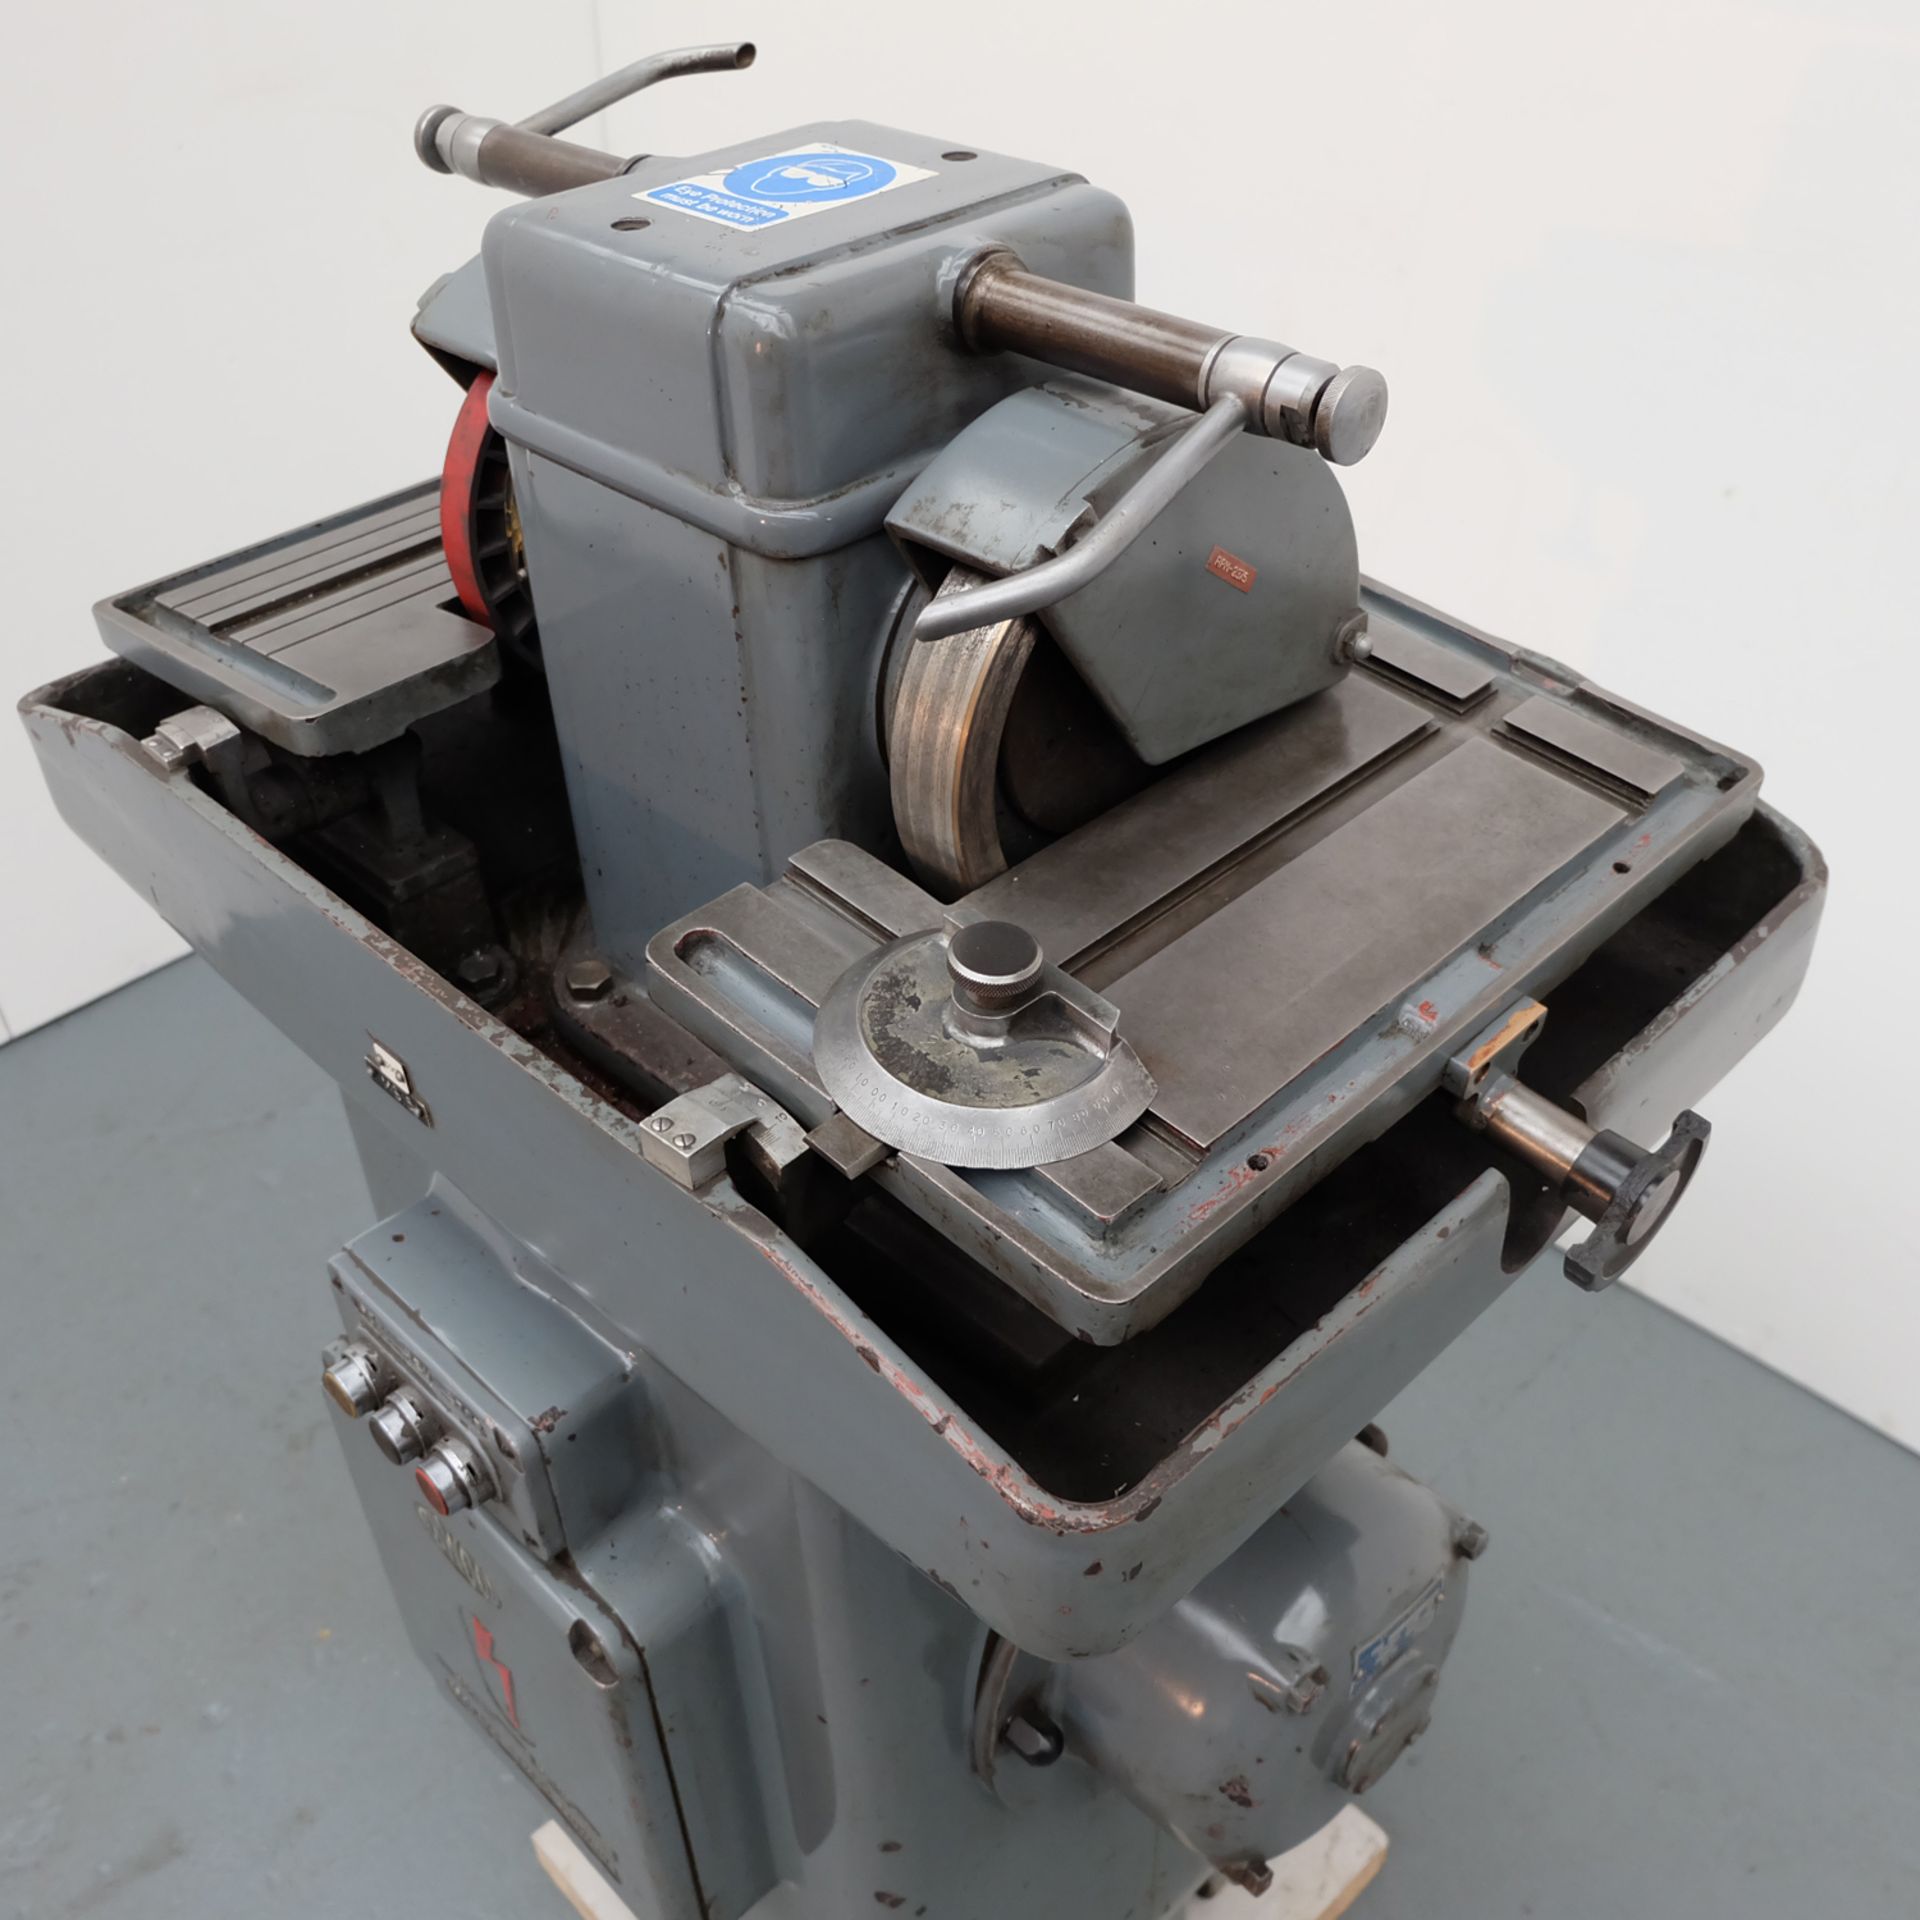 Abwood Twin Tilting Table Double Ended Lapping/Grinding Machine. 3 Phase. 1HP. - Image 5 of 10